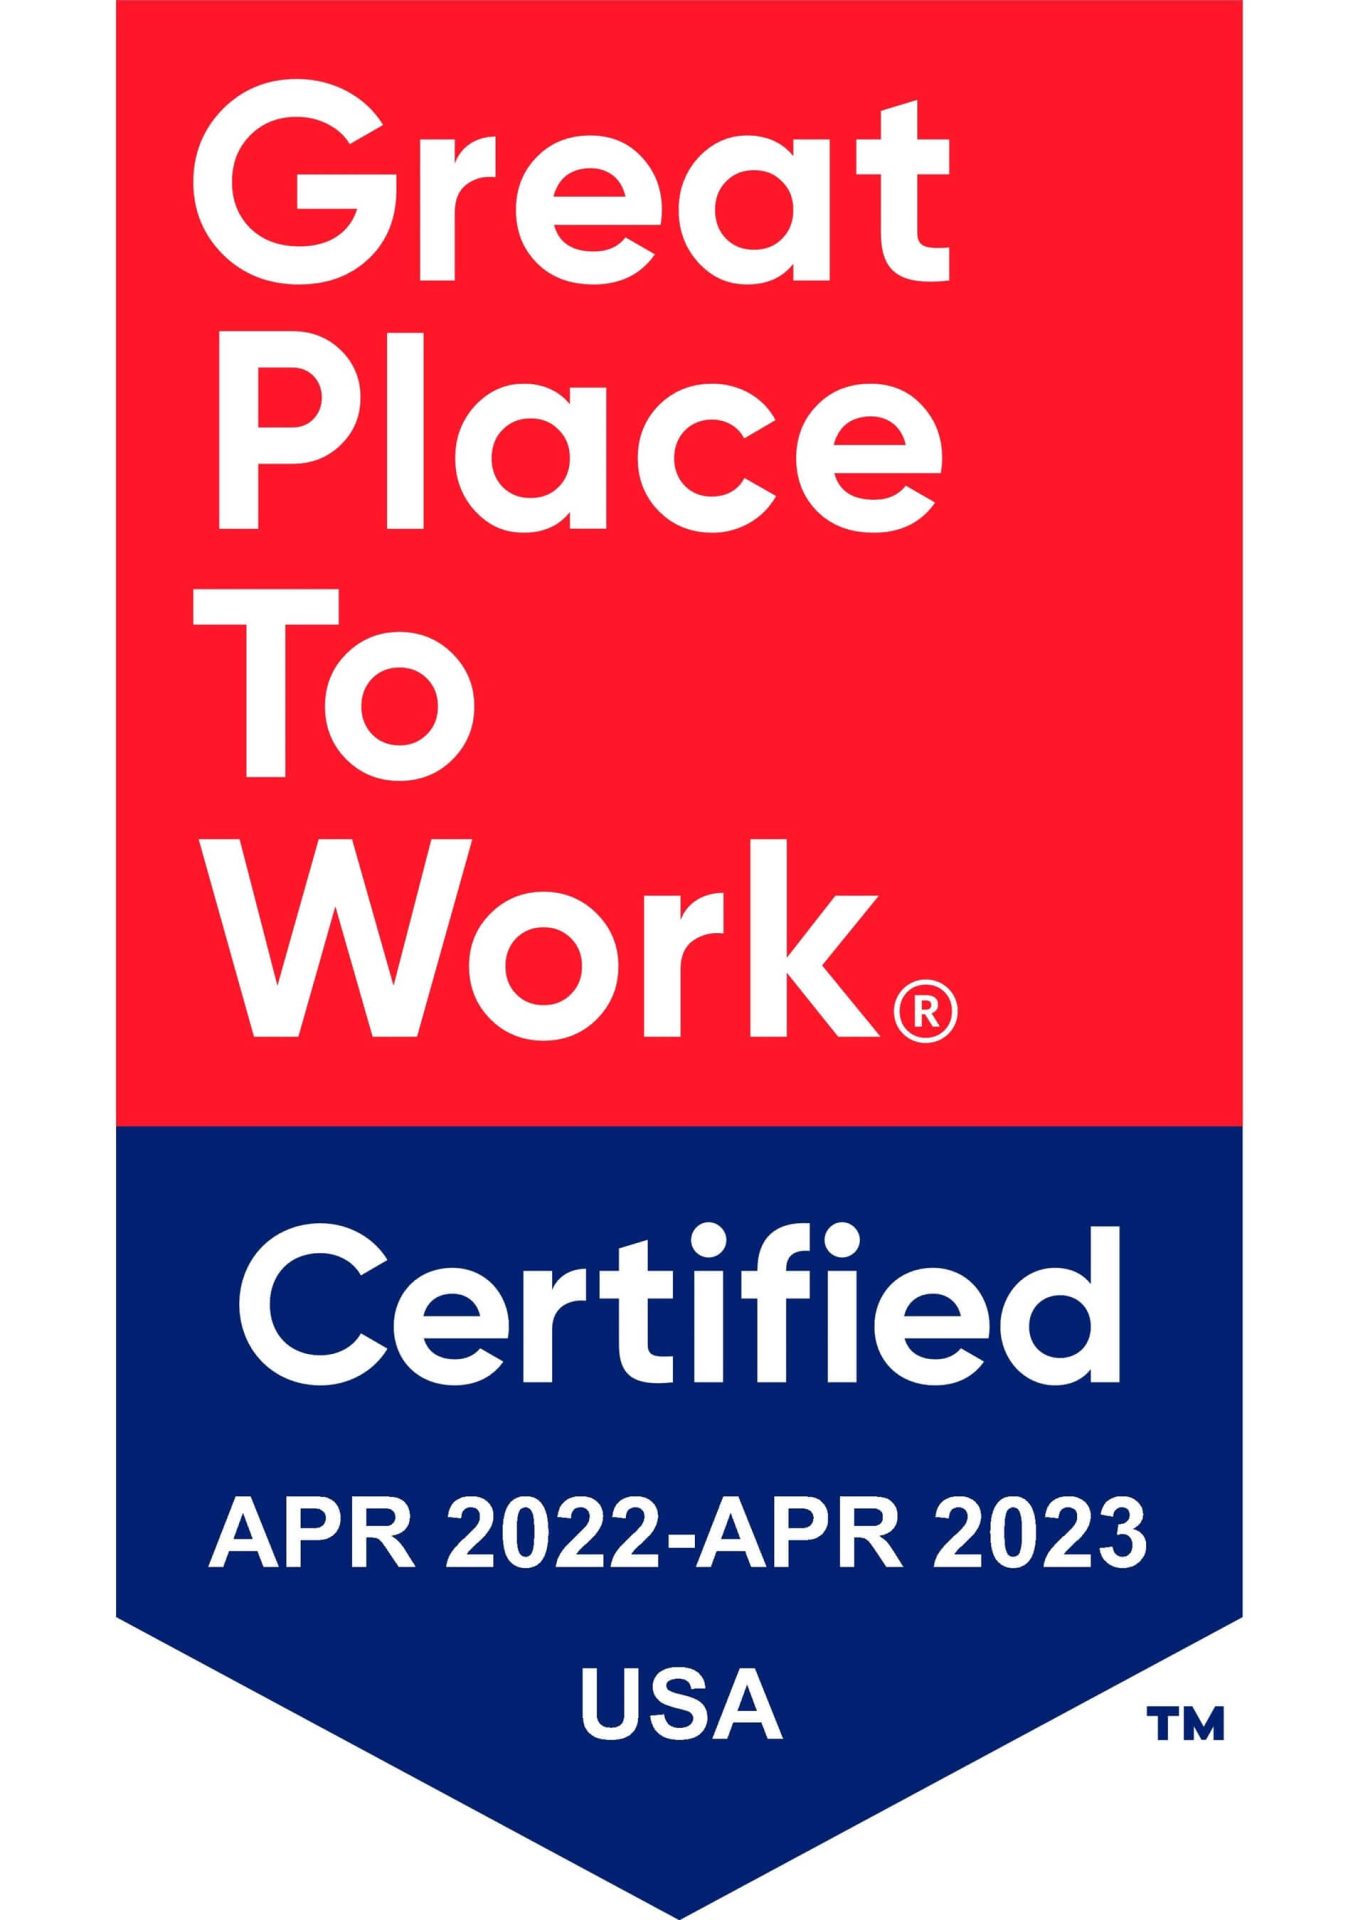 Great Place to Work award graphic